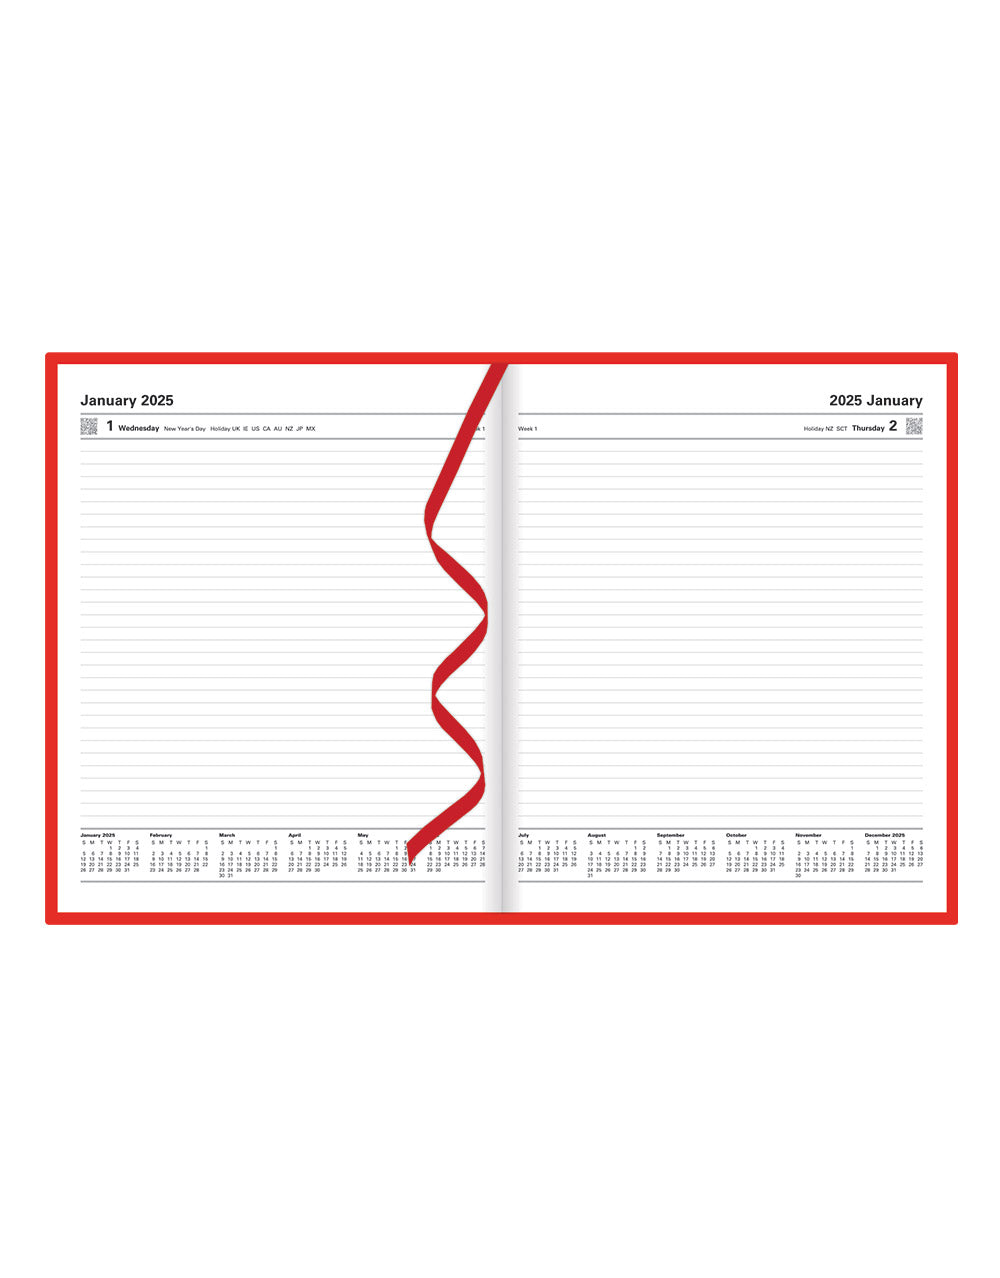 Standard Quarto Day to a Page Planner 2025 - English 25-C10YBY#color_red